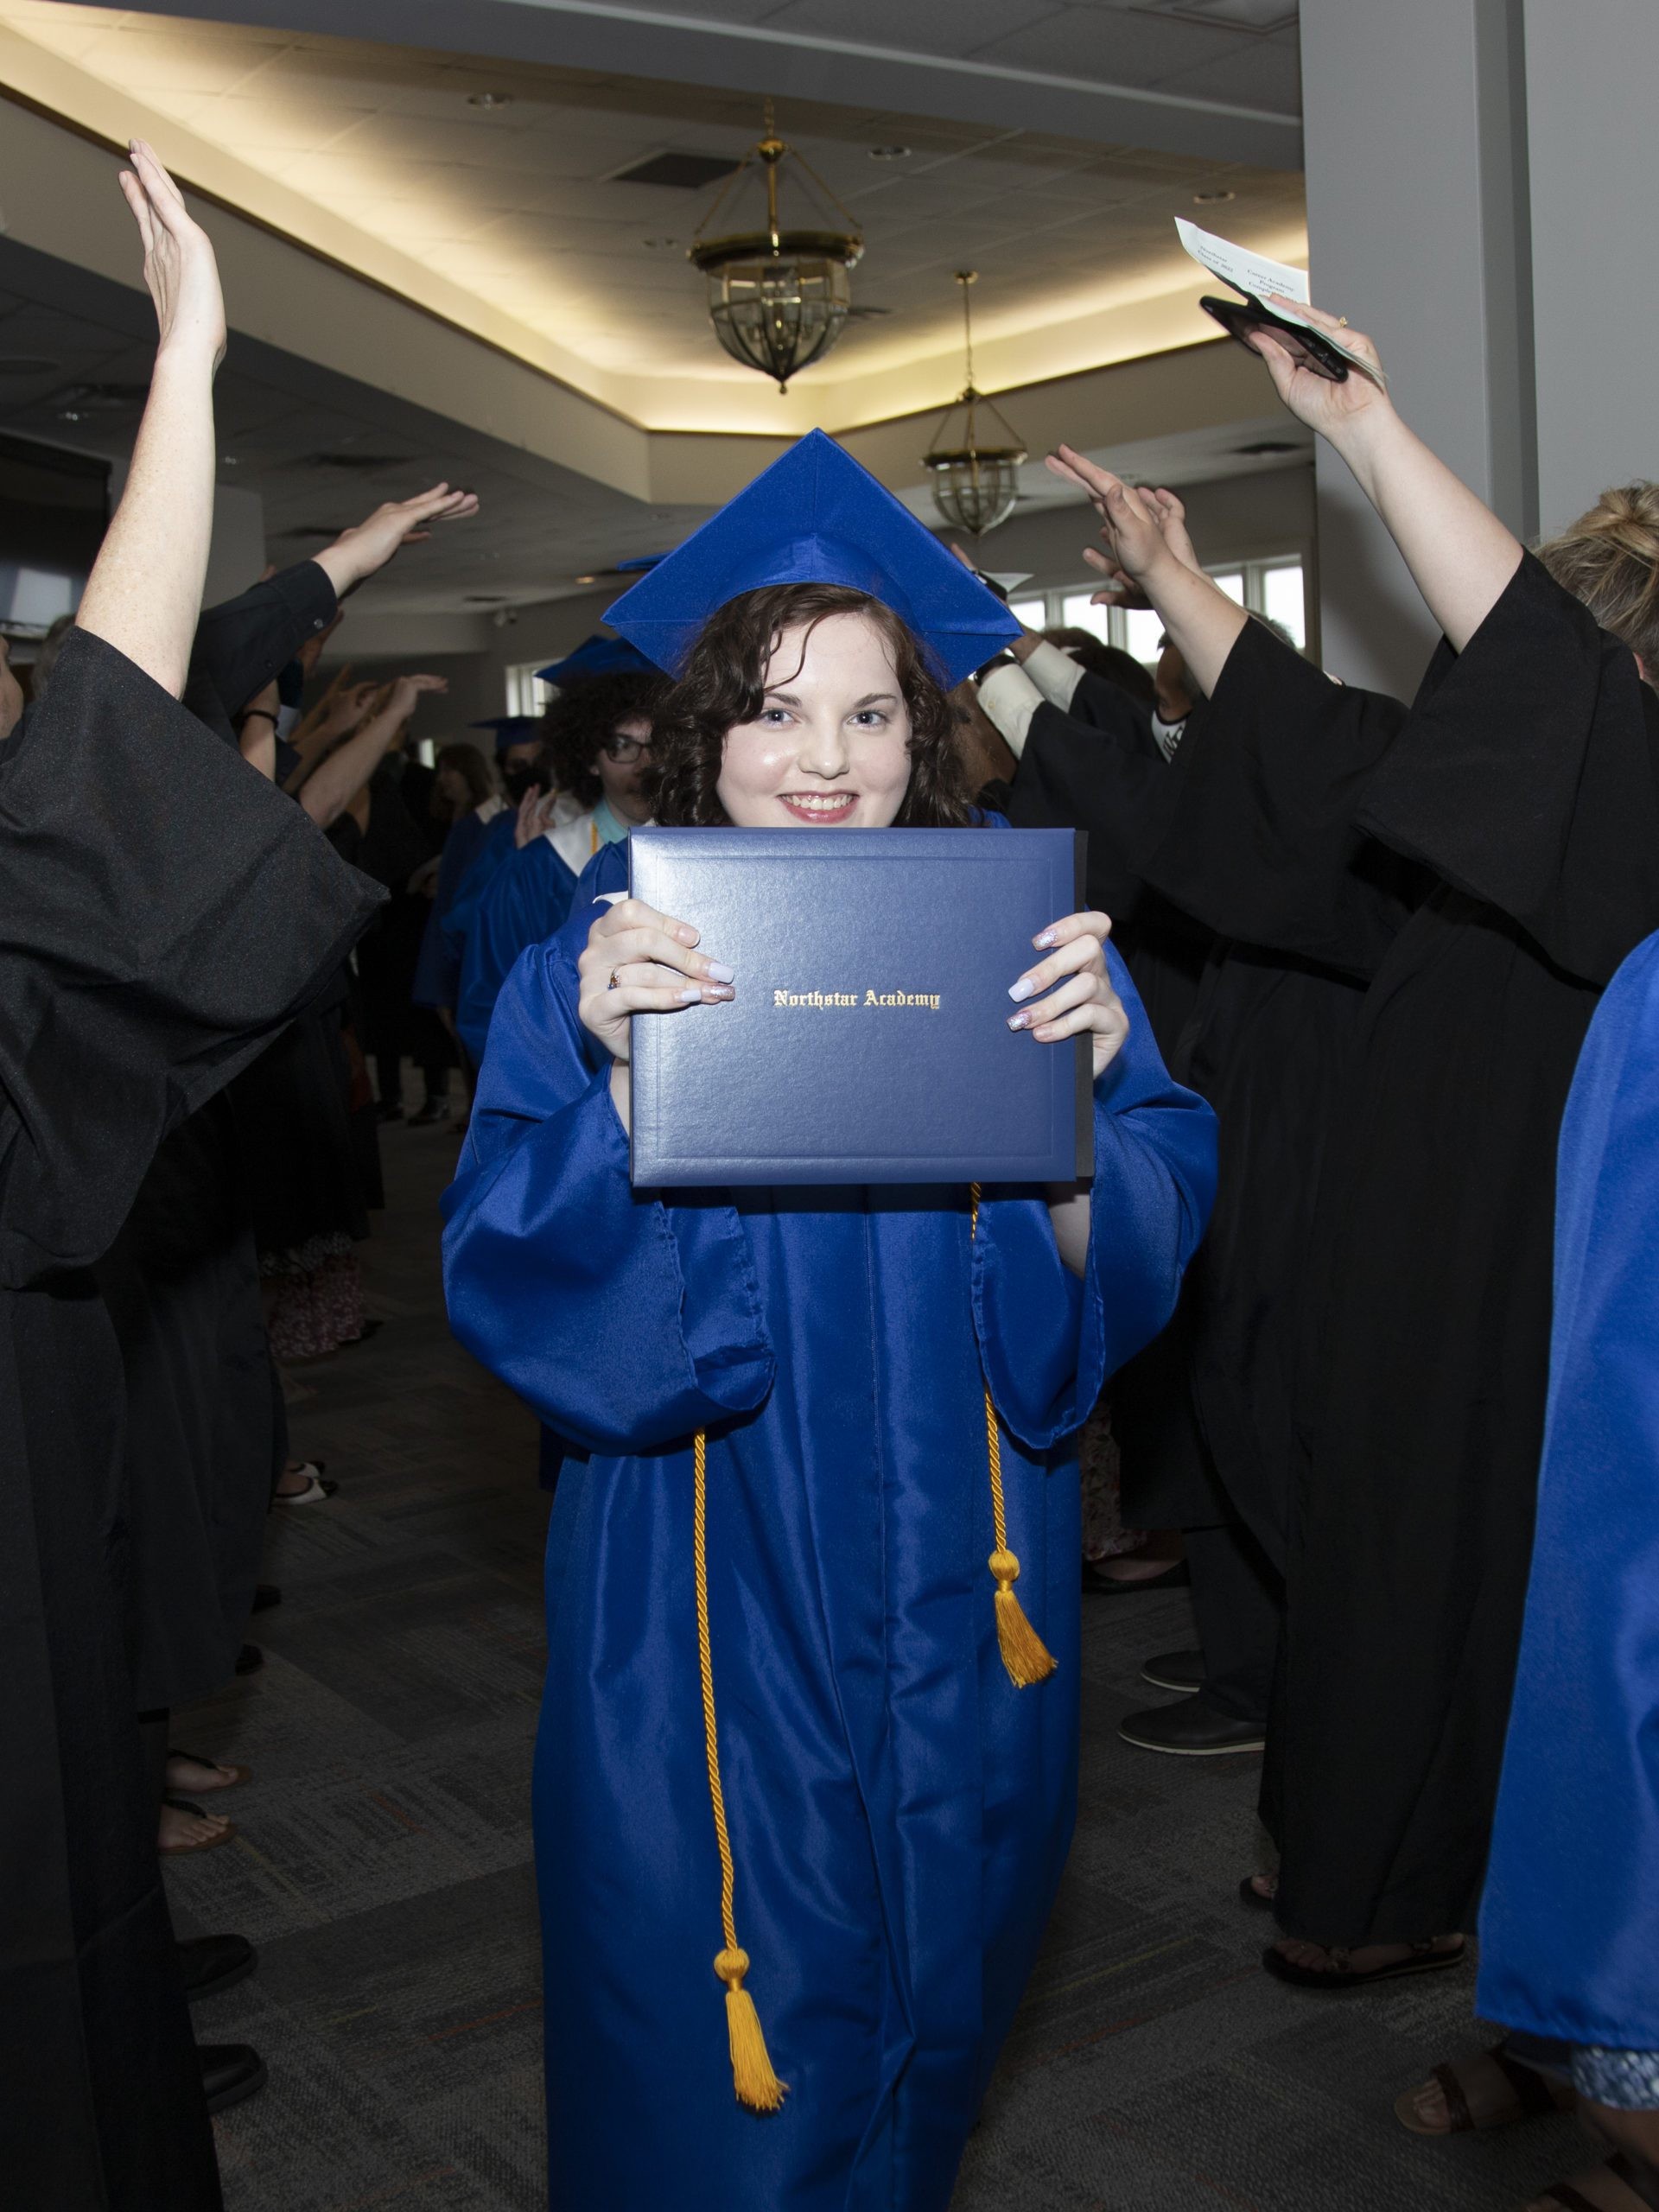 student smiling and holding up Northstar diploma